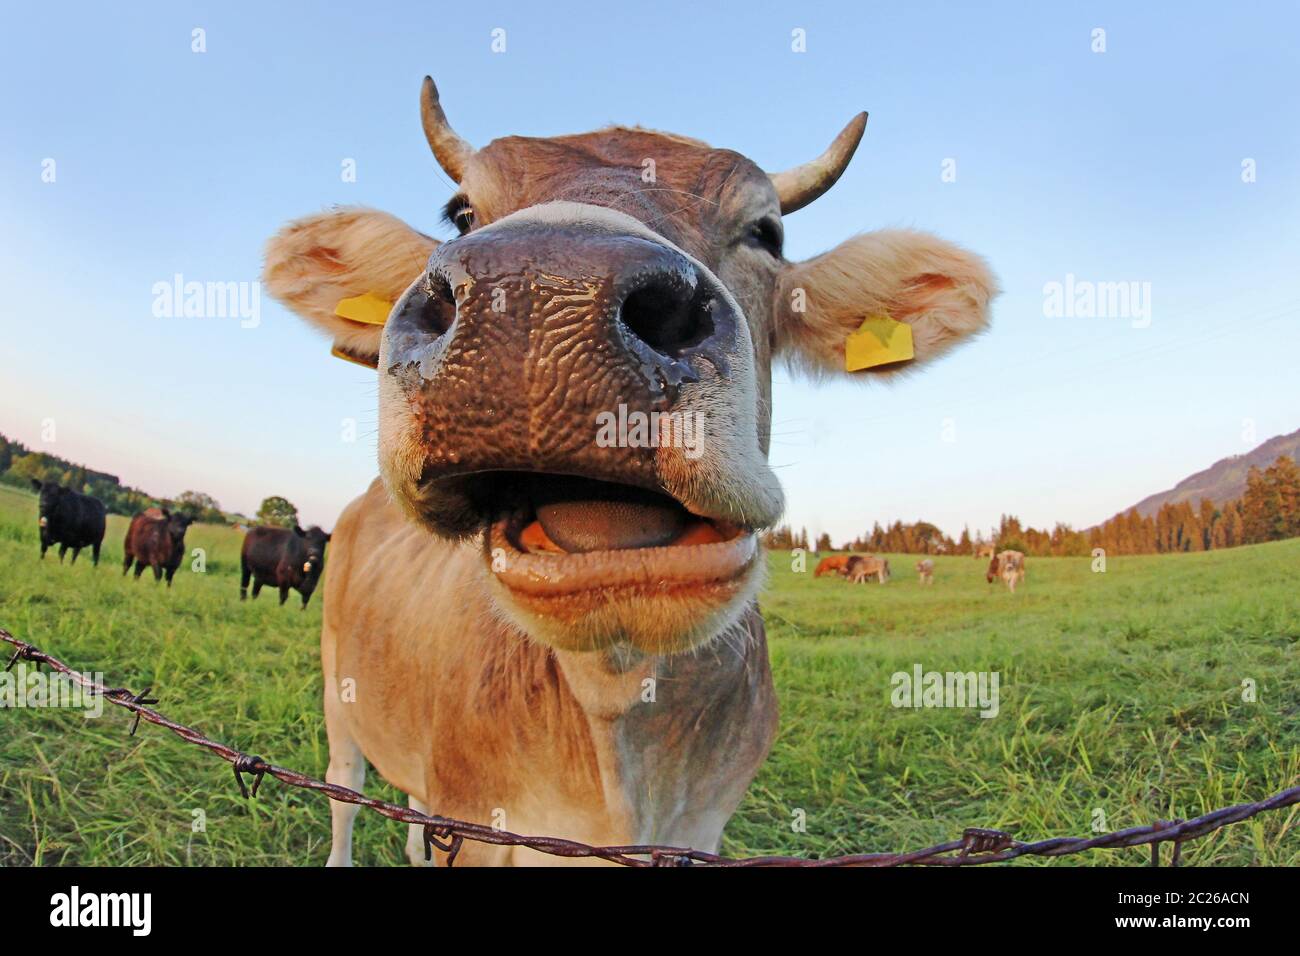 Wide-angle shot of a curious brown cow with horns in a pasture Stock Photo